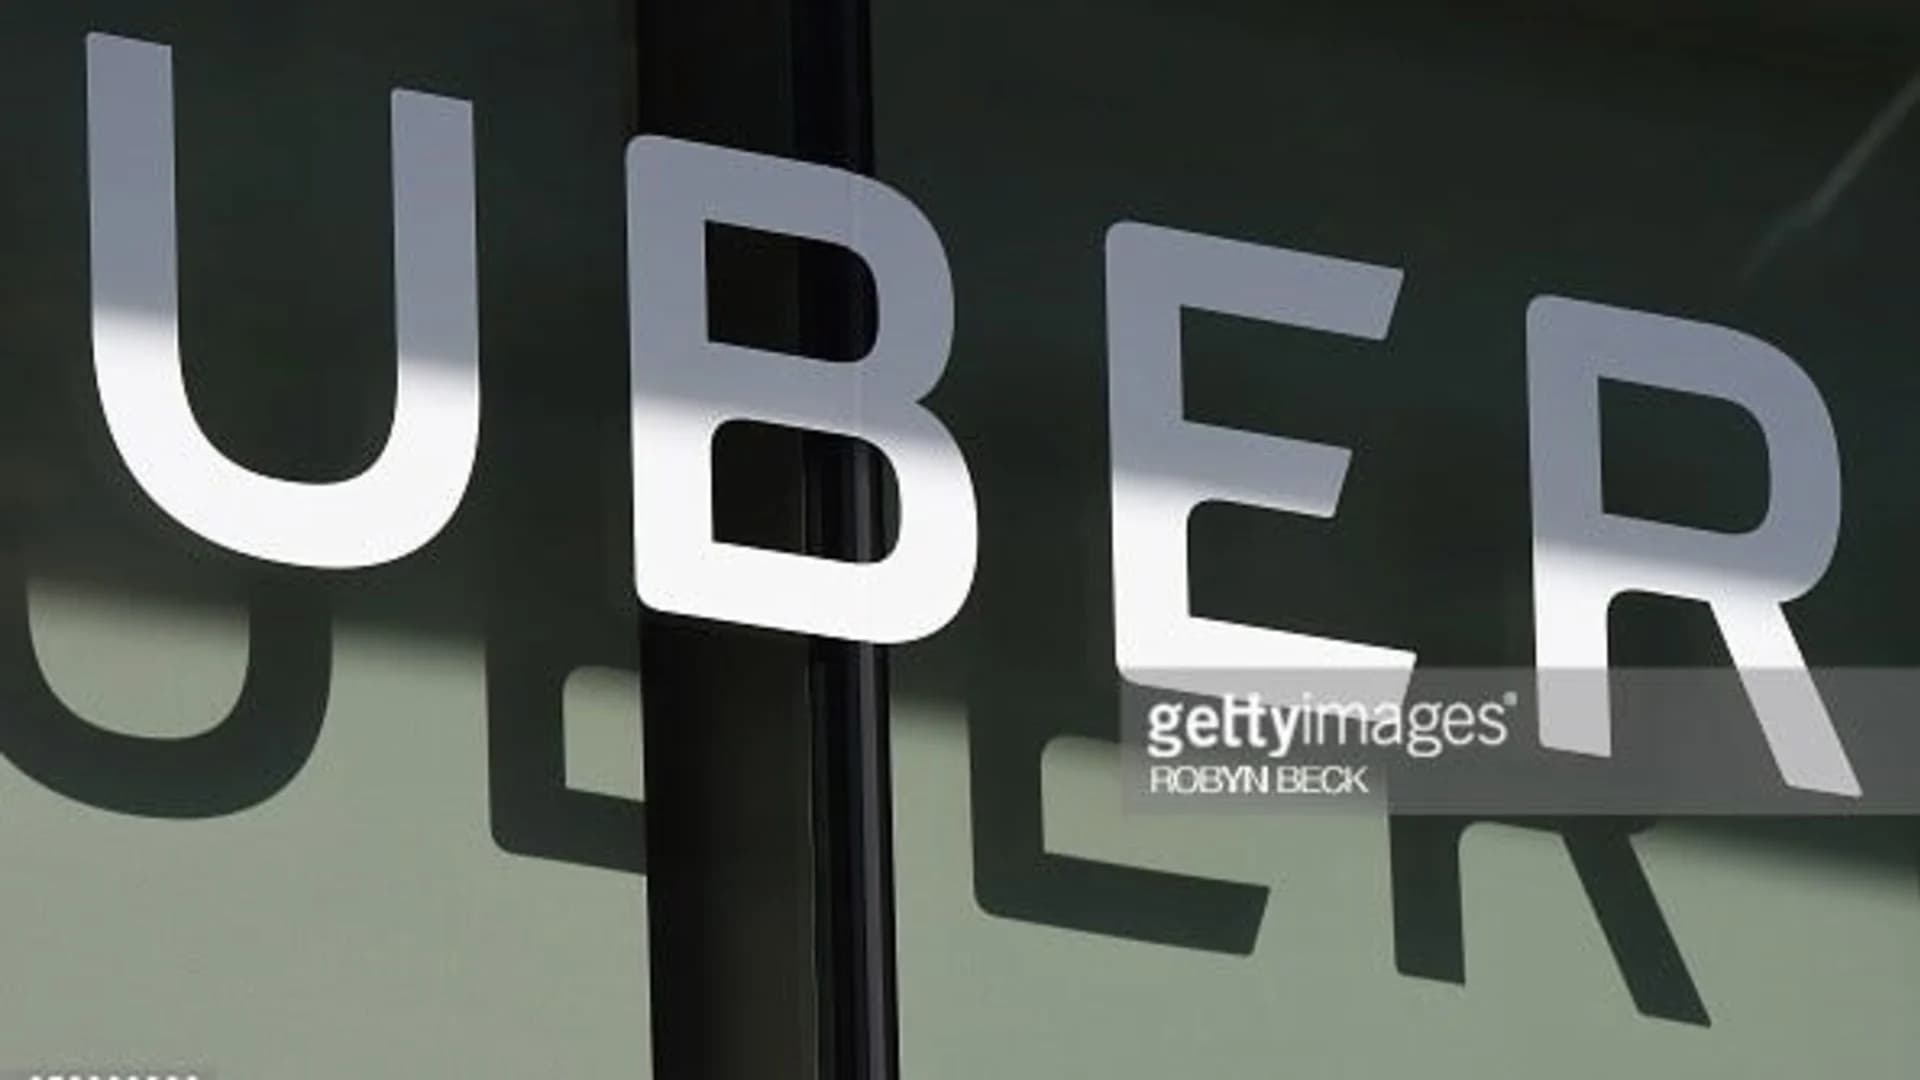 #N12BK: Uber ends policy of forced arbitration for sexual assault claims